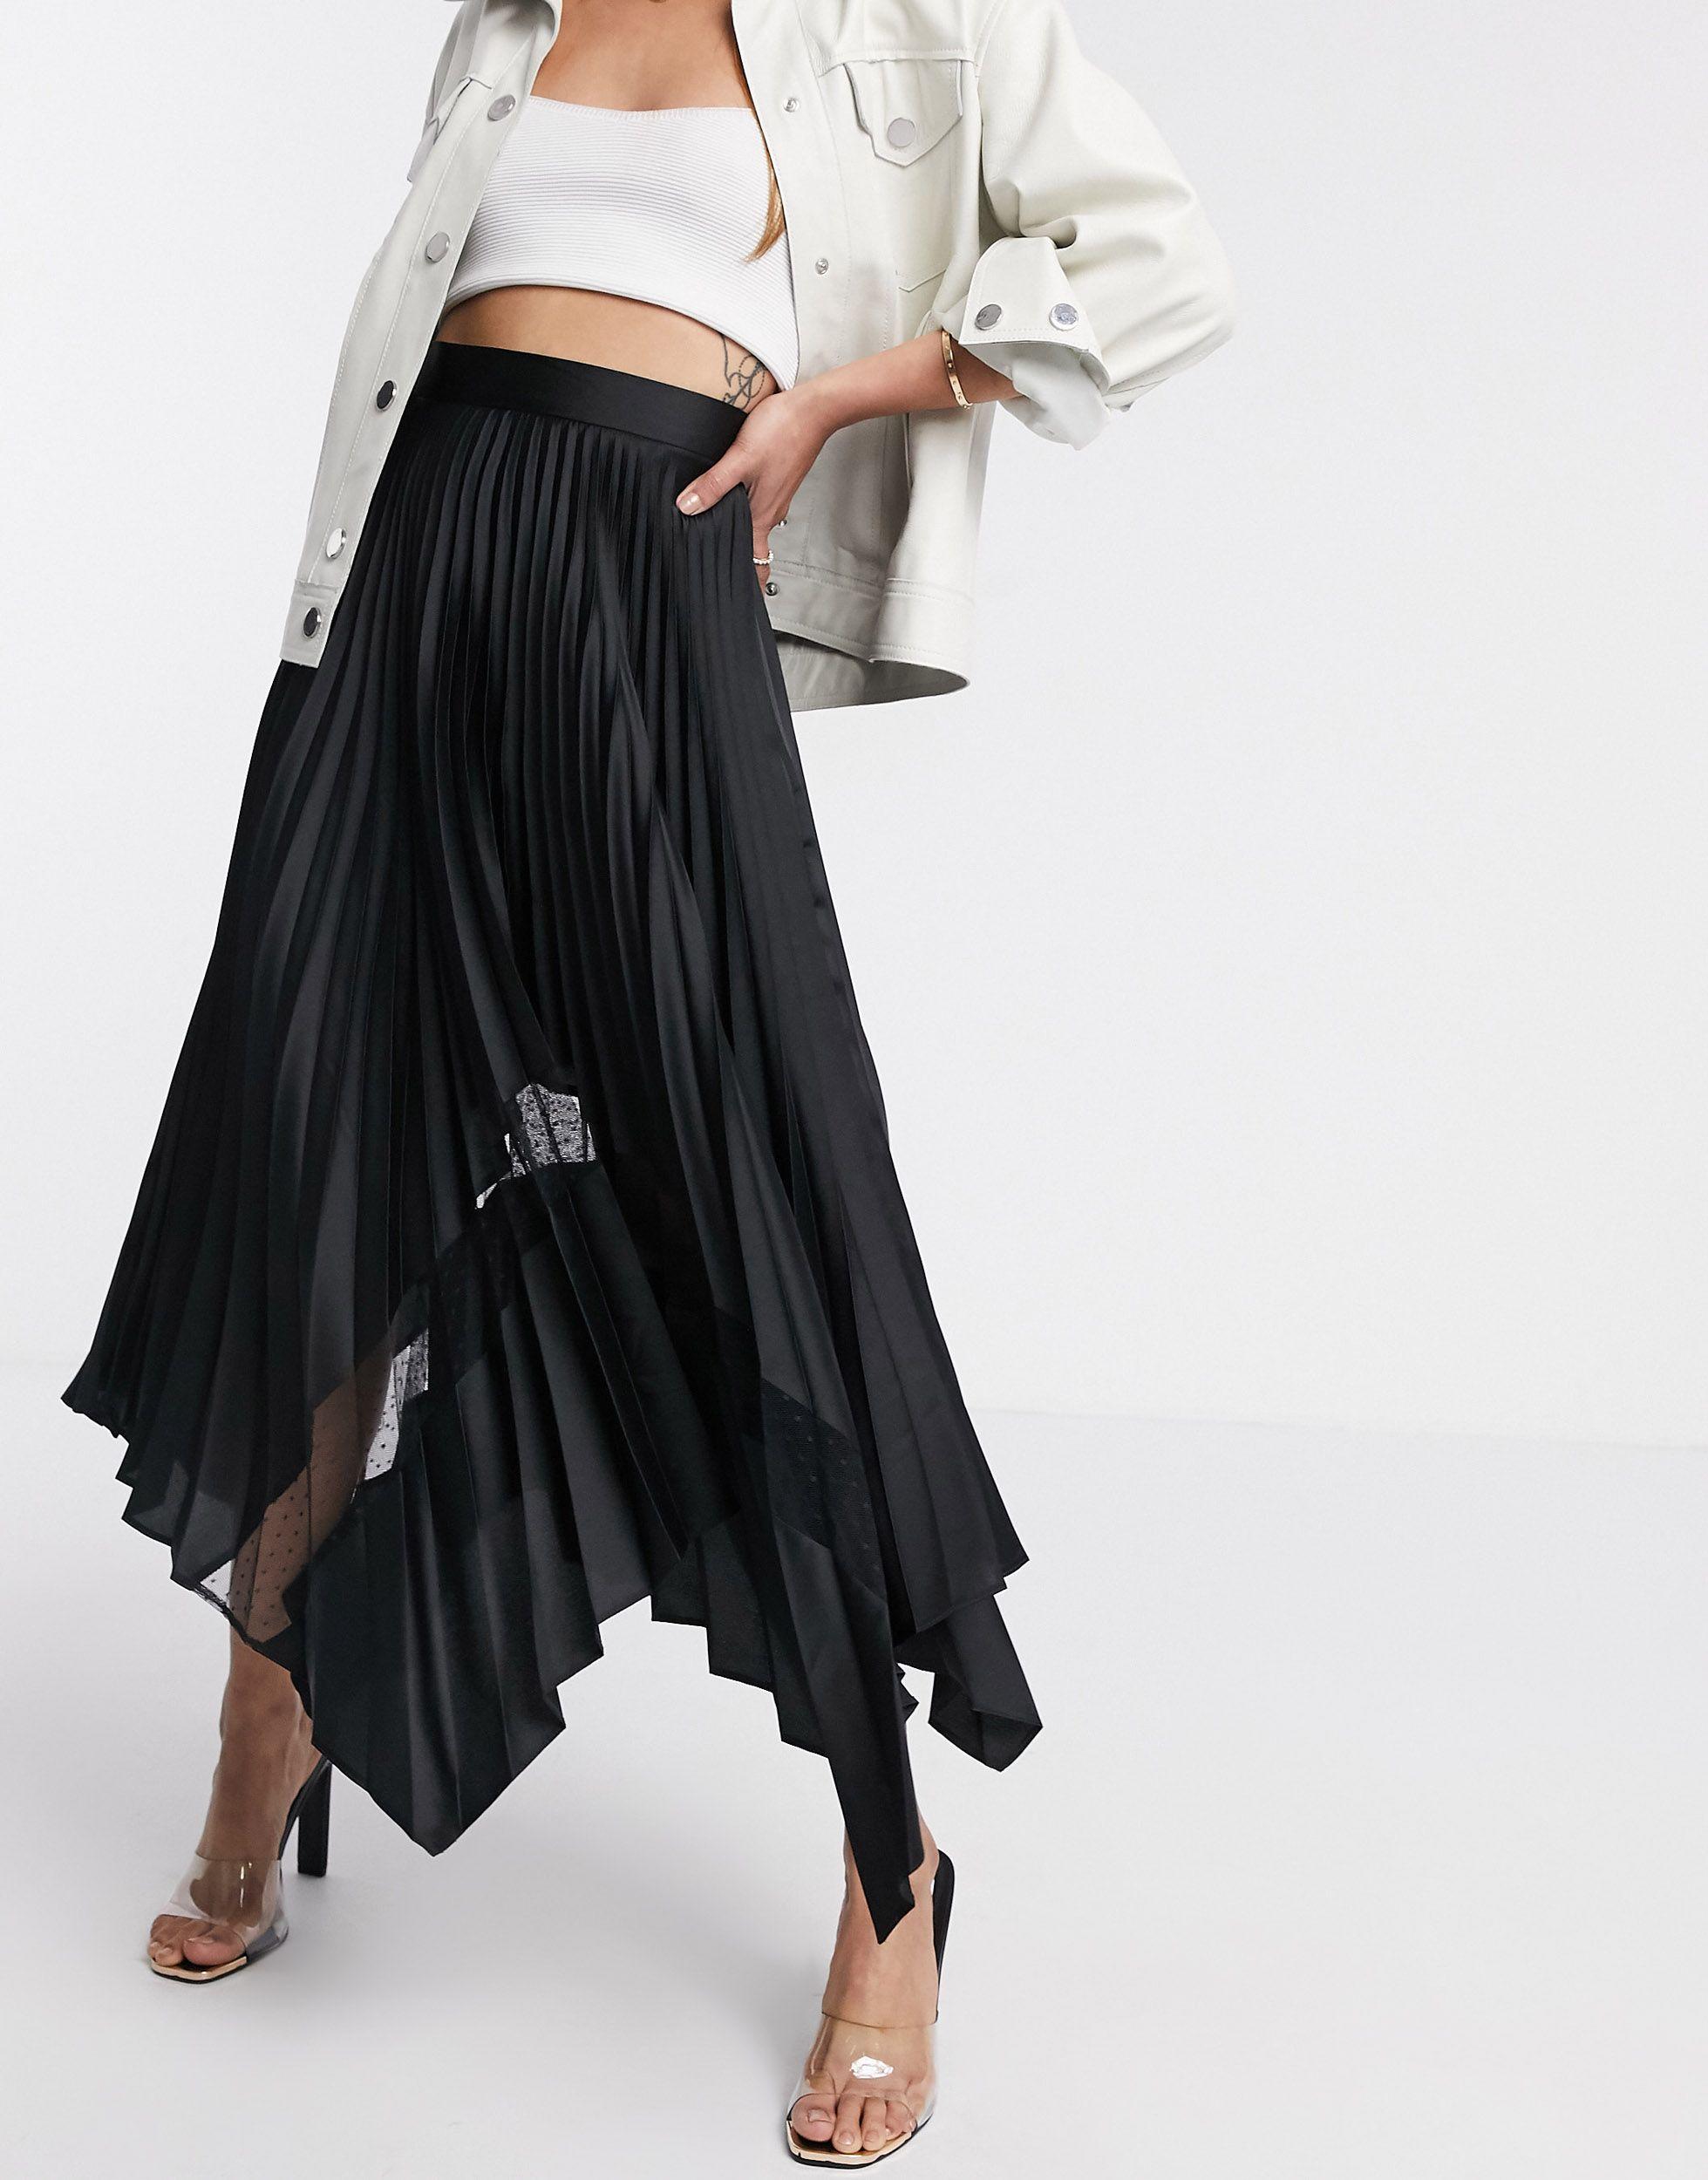 ASOS Lace Insert Pleated Midaxi Skirt in Black | Lyst